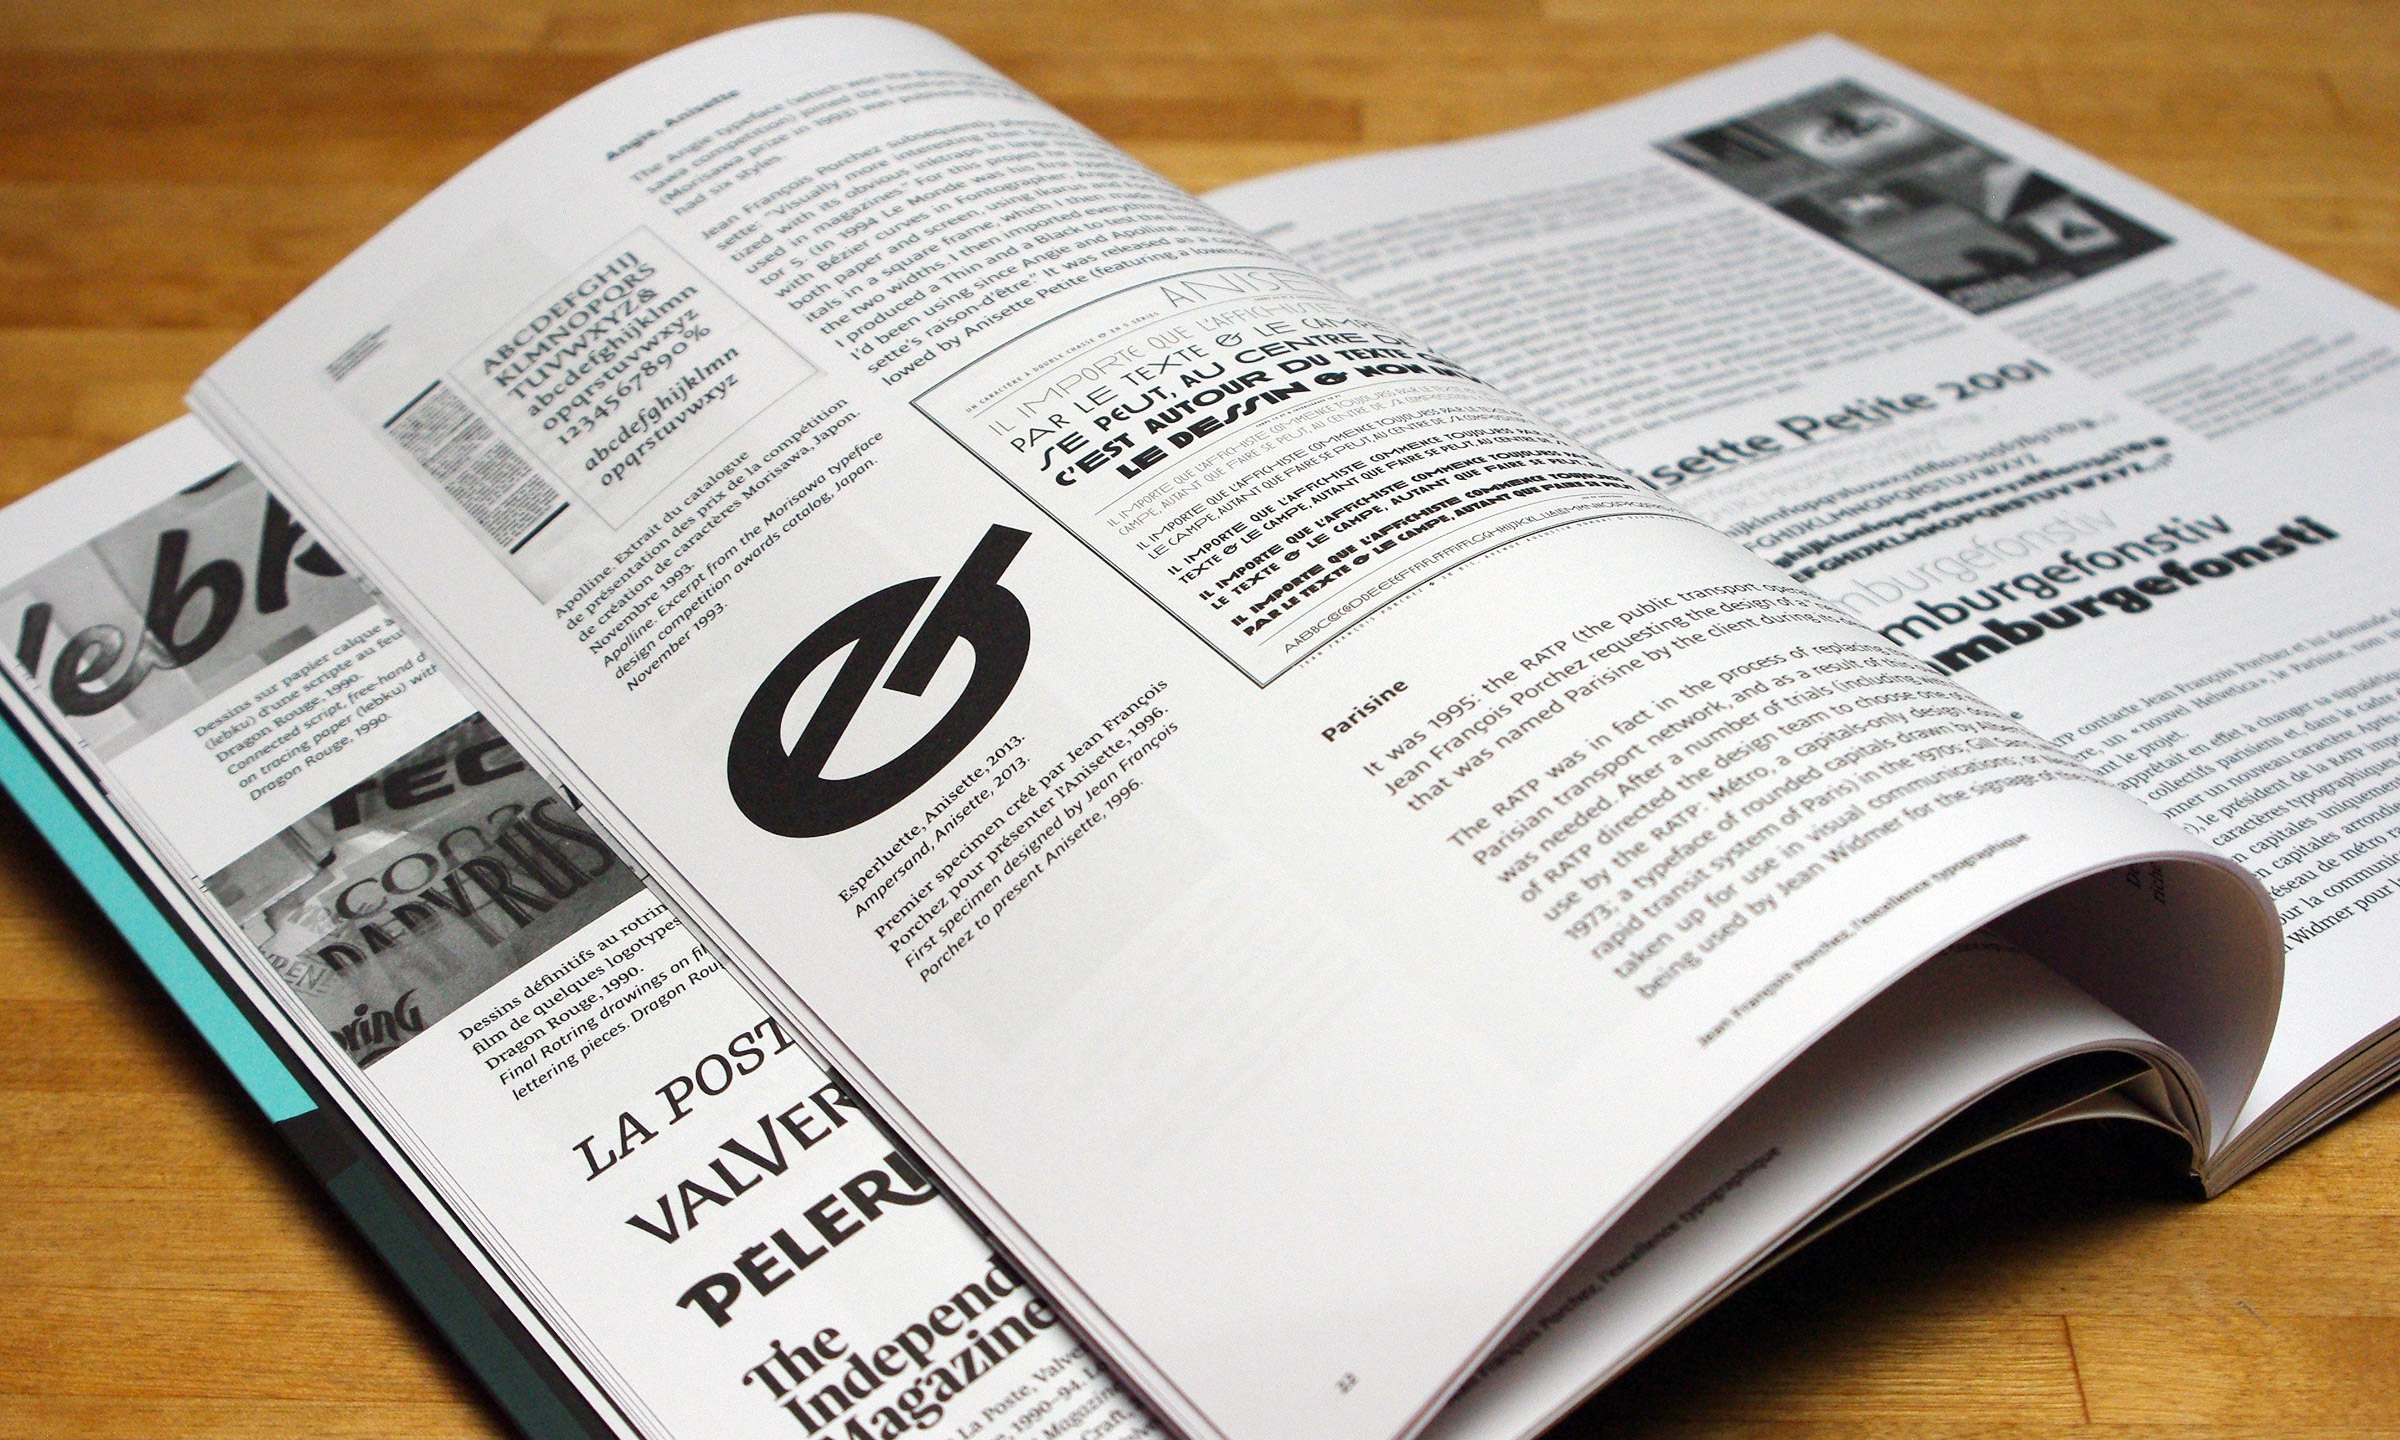 Spread from_Apprendre à apprendre / Learning to learn_ (pages 22-23).